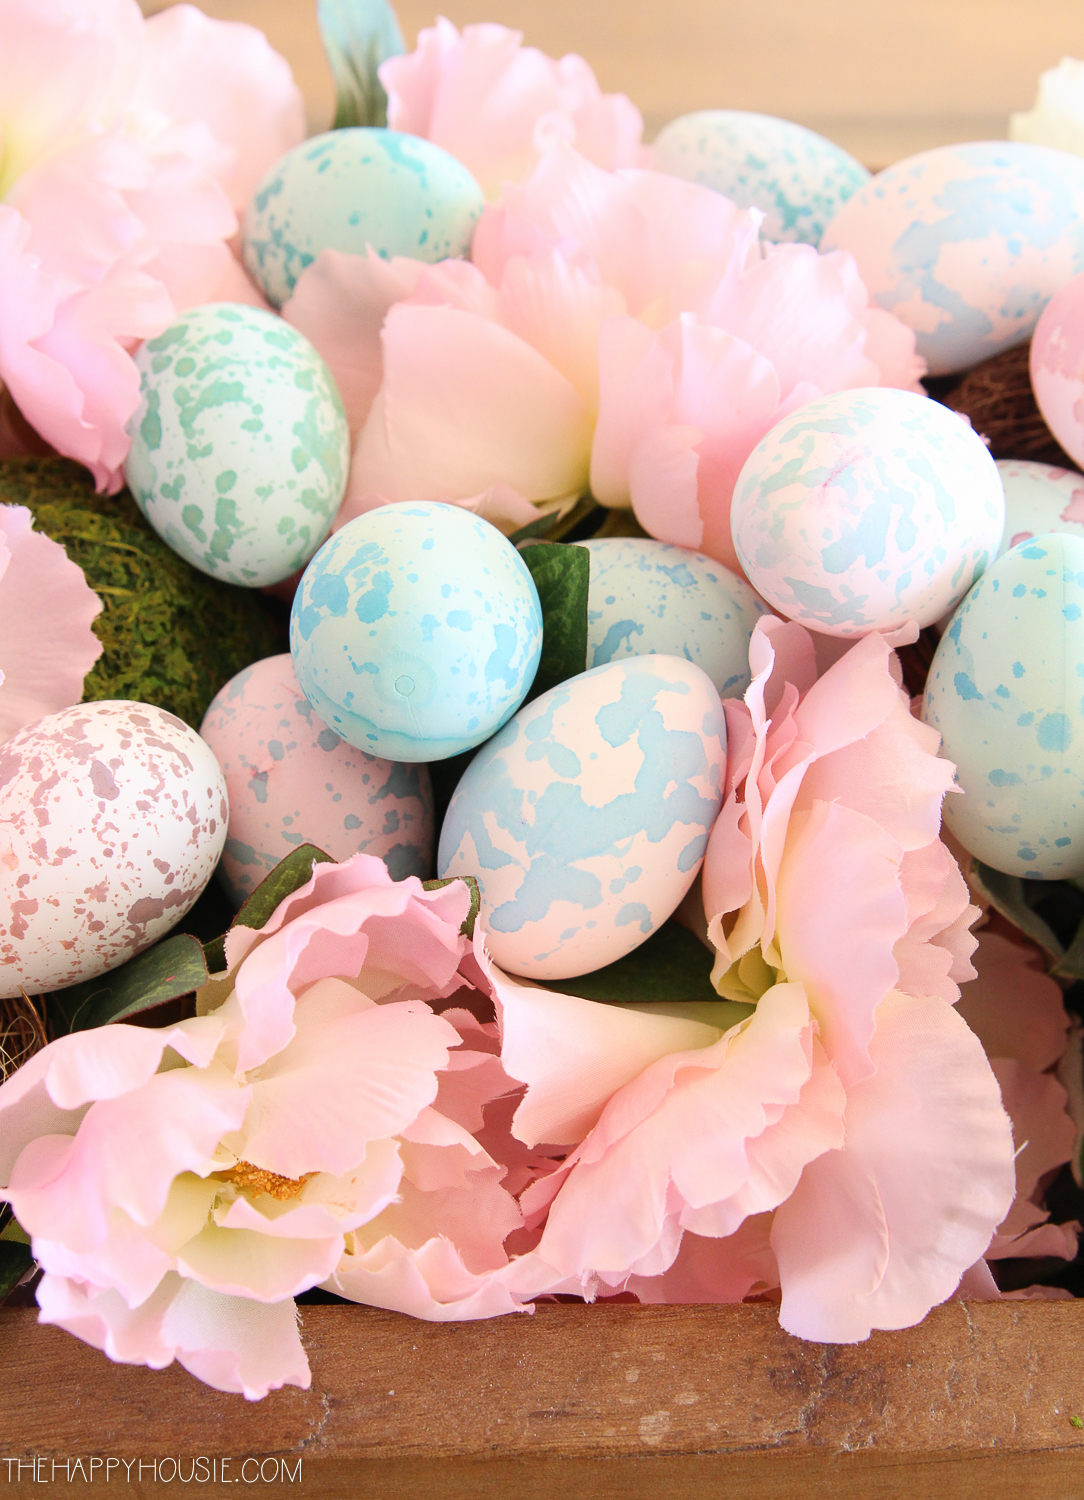 Up close shot of the painted Easter eggs and pink flowers.